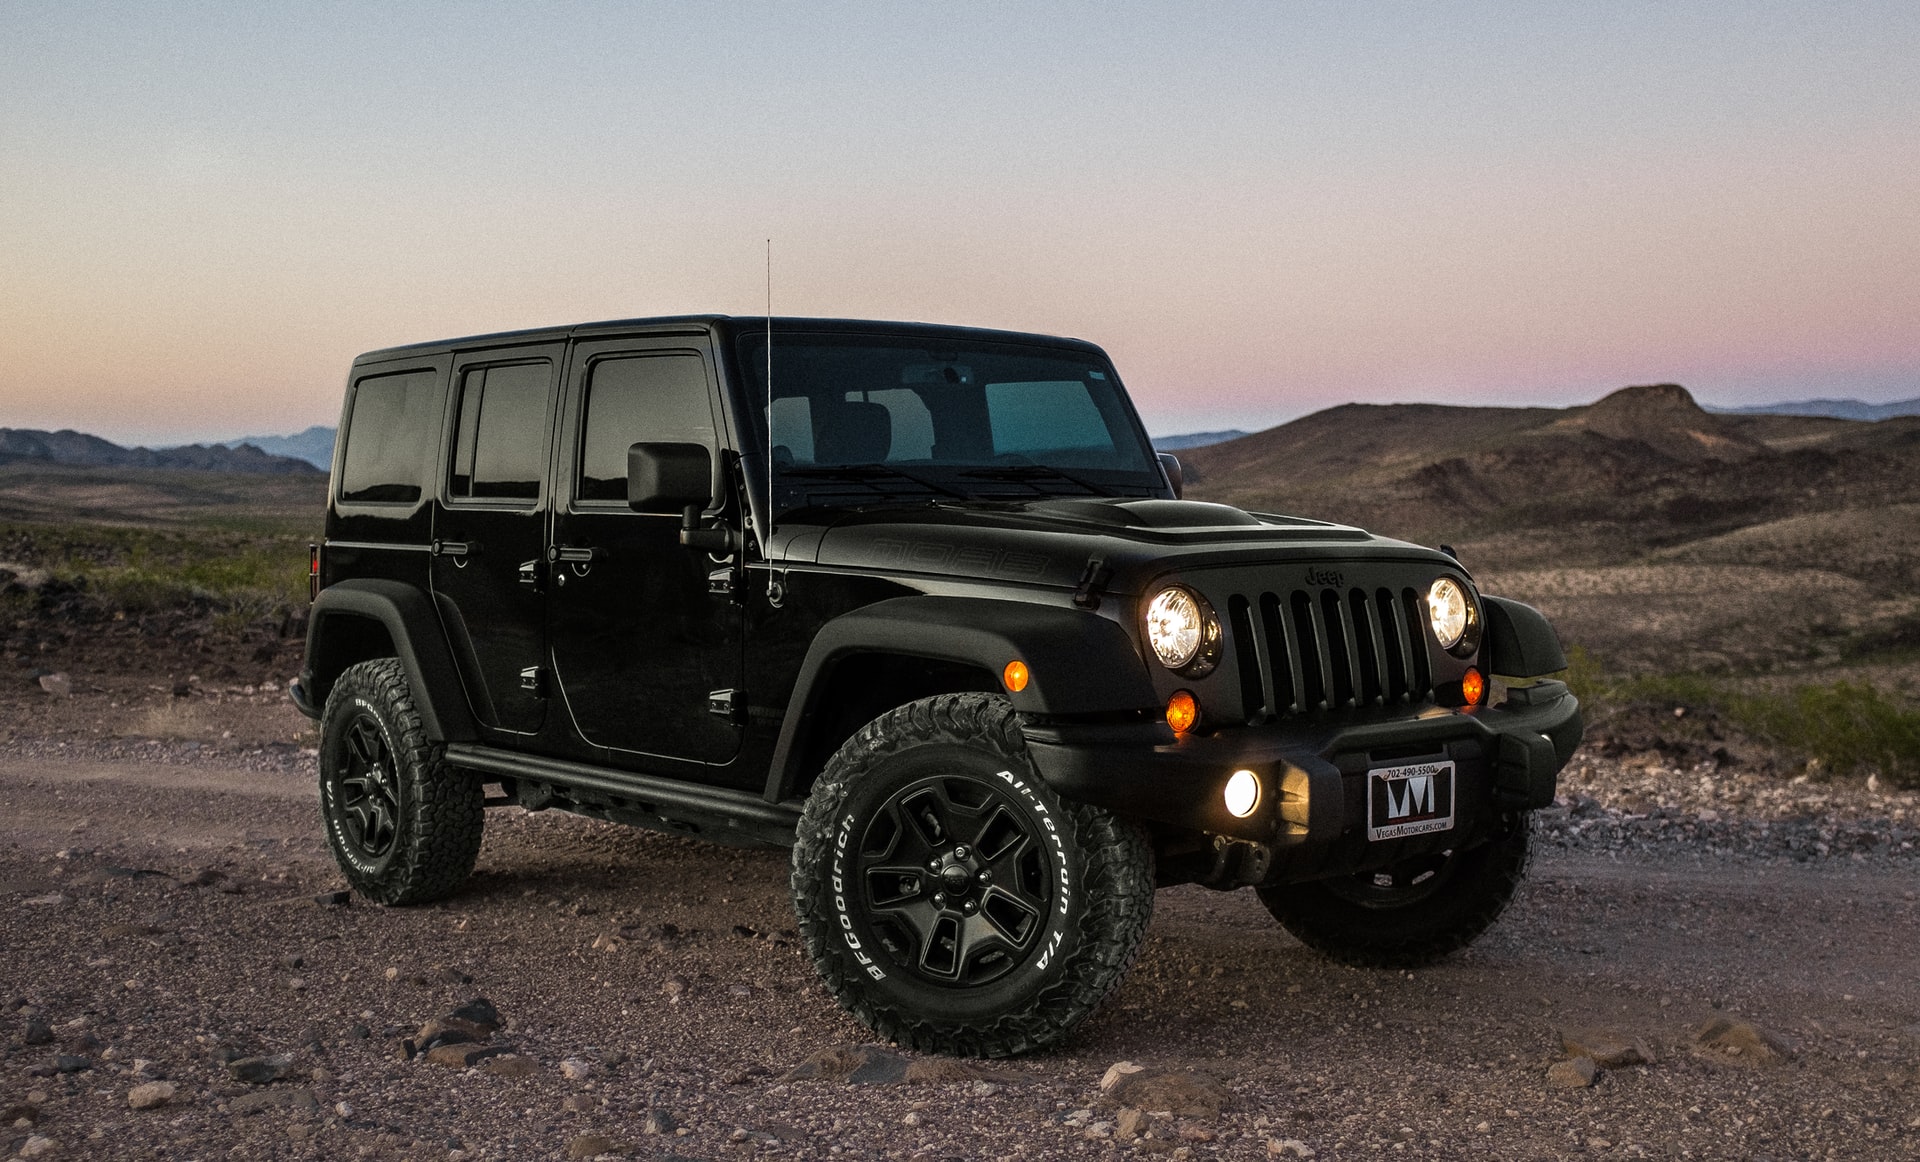 10. Additional Resources and Recommendations for Jeep Wrangler Owners and Mountain Biking Enthusiasts.